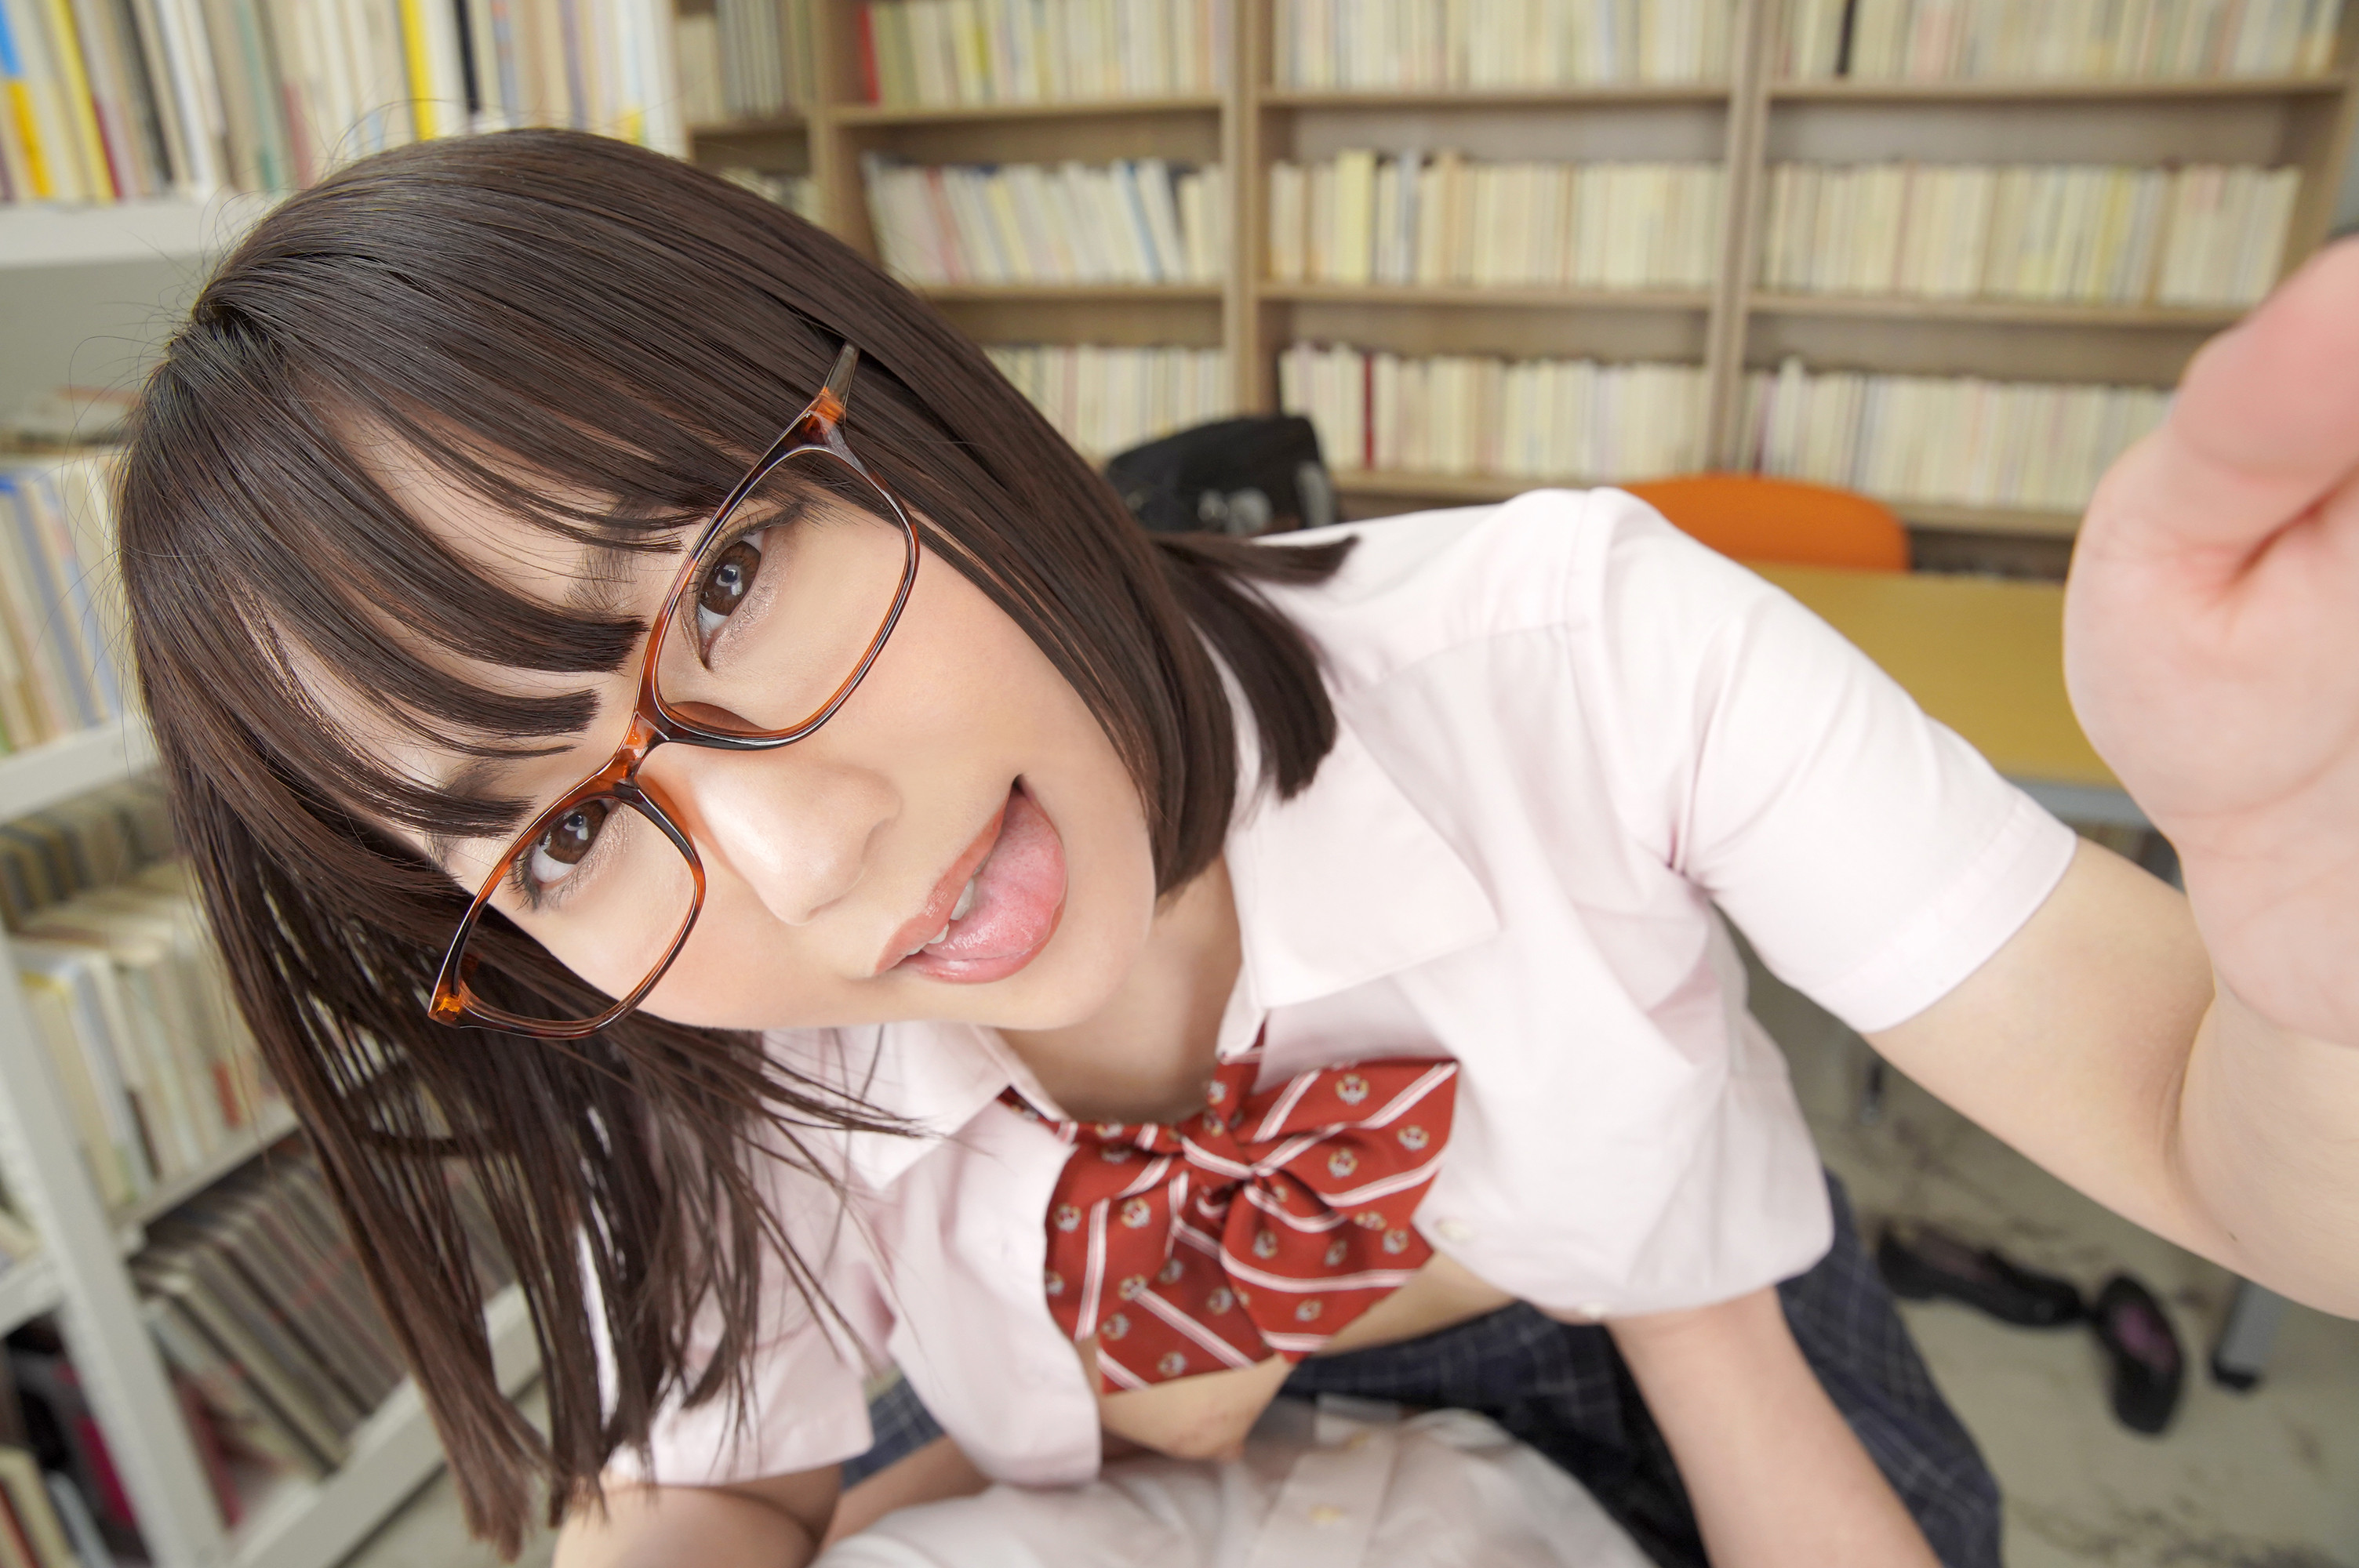 Tempted by a Beautiful Girl with Glasses and a Uniform Part 1 - Asian Schoolgirl Library Sex Slideshow